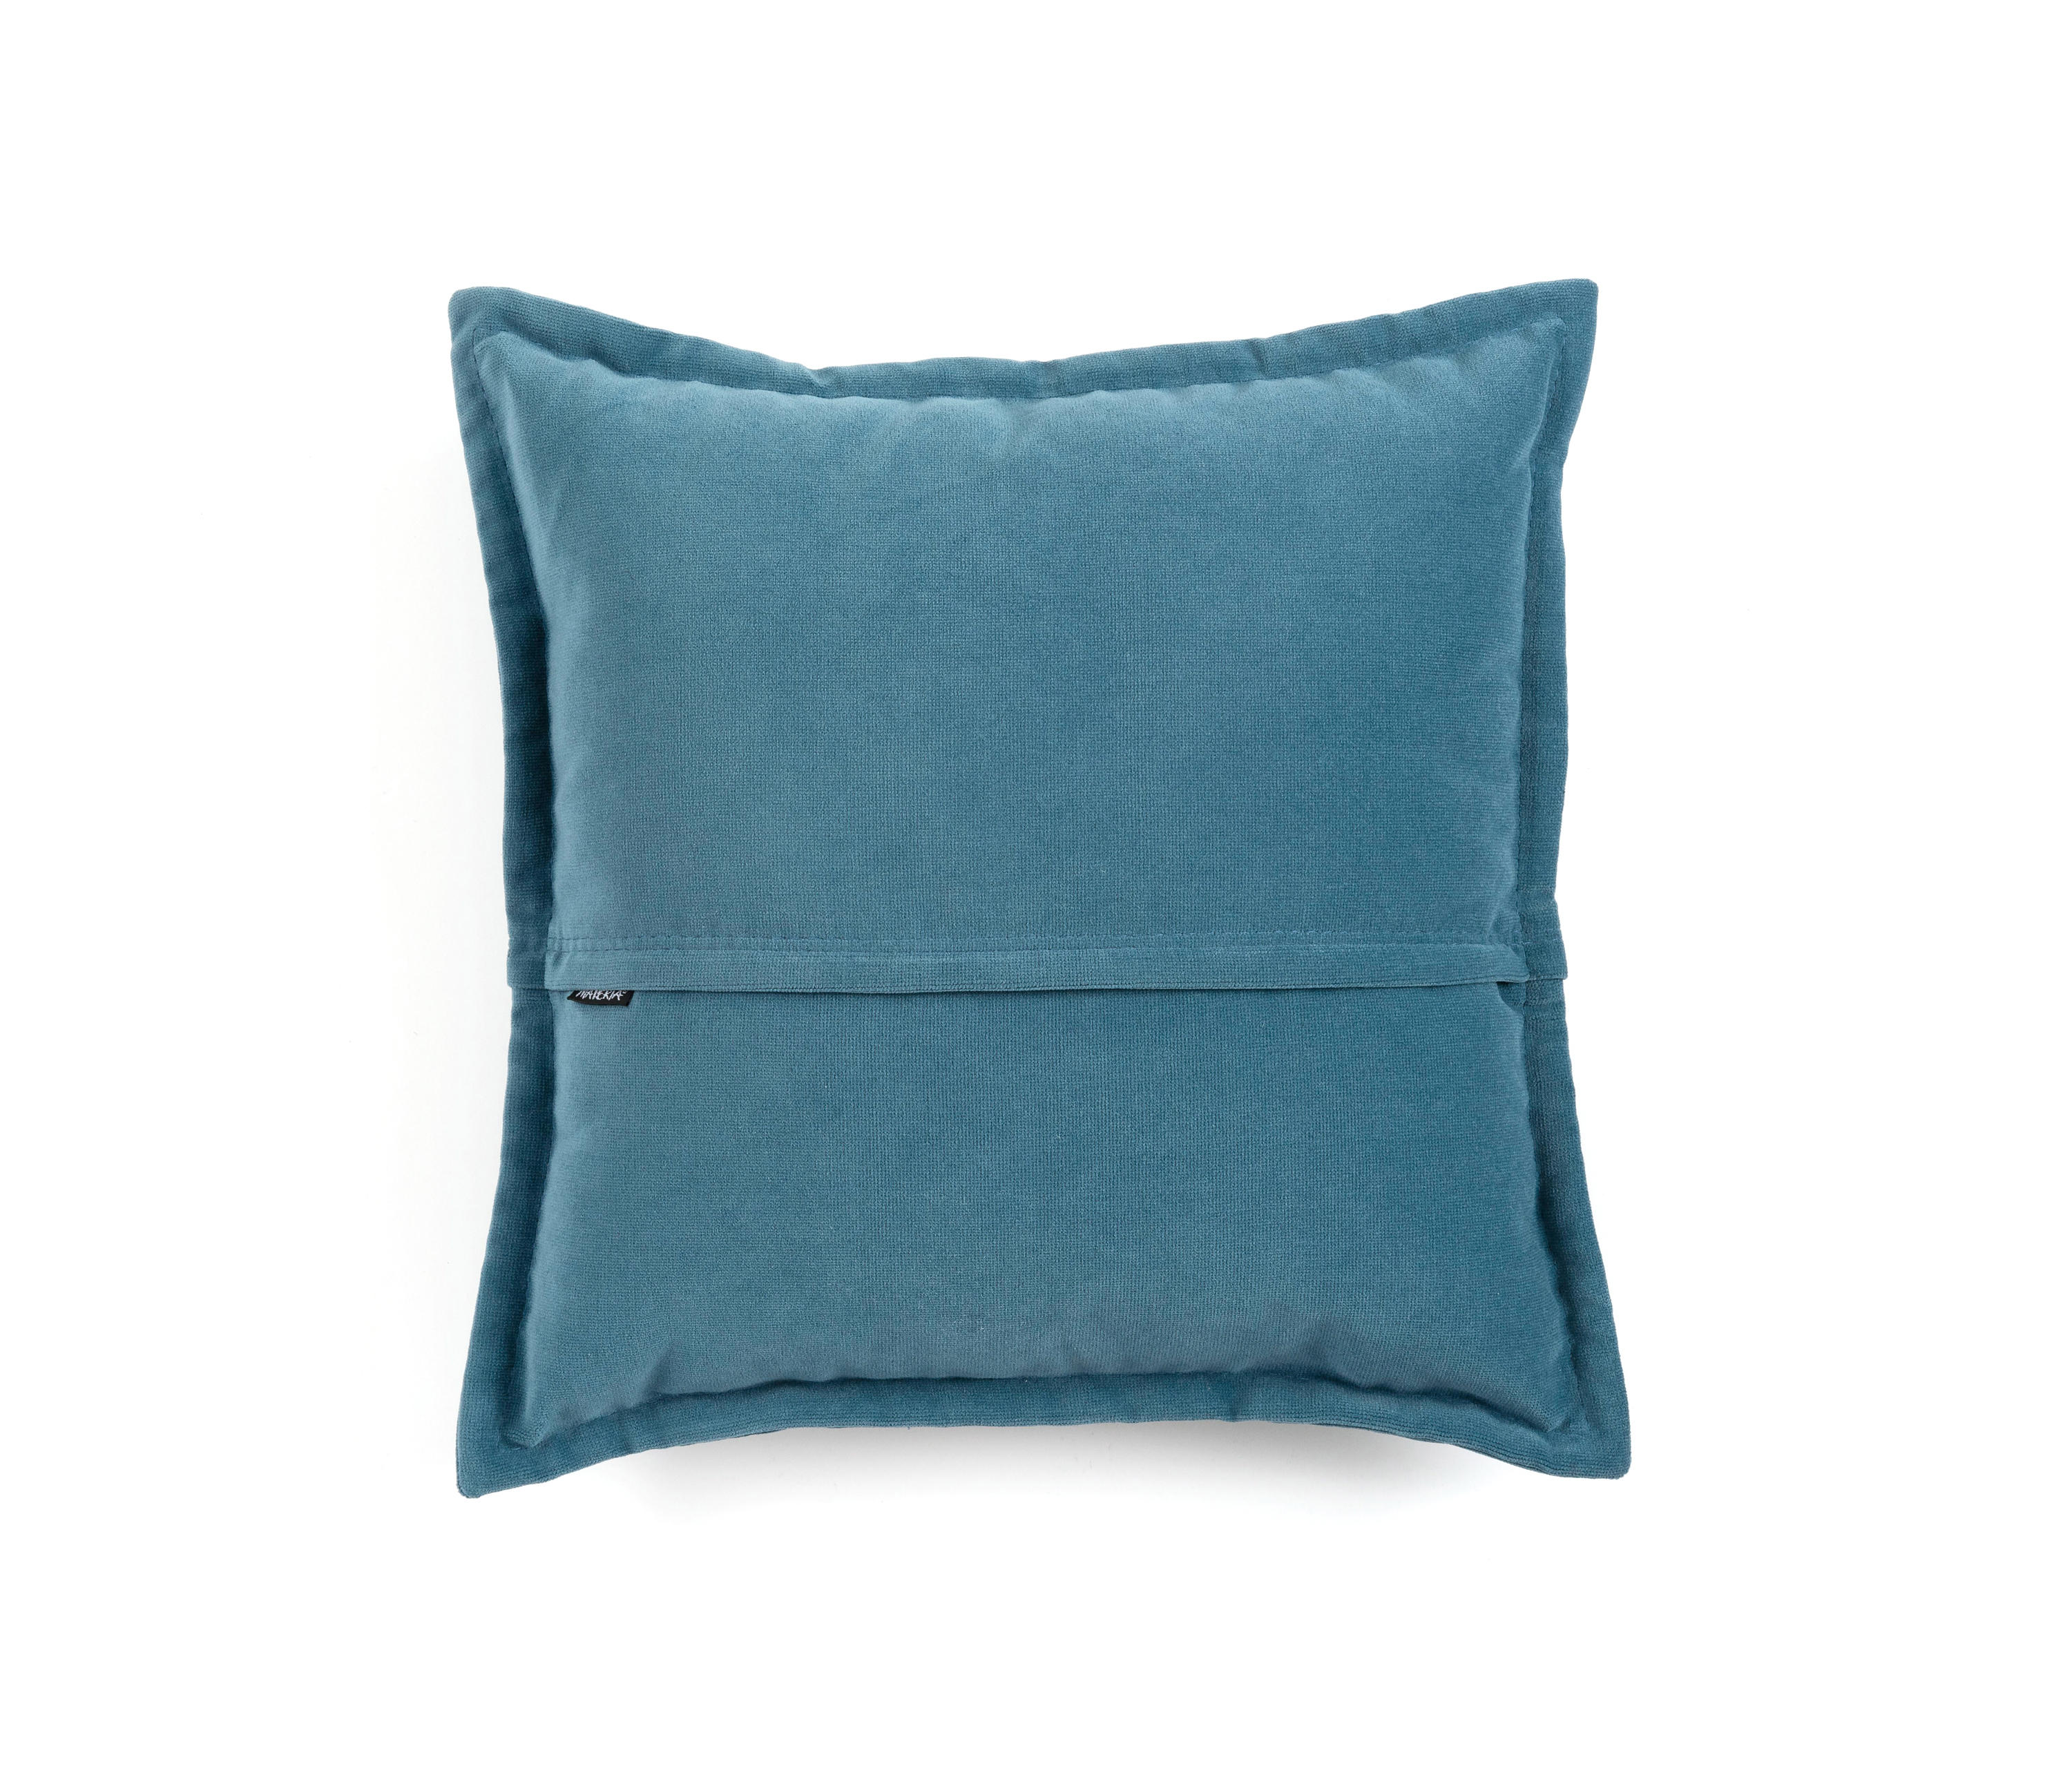 Avec pillow - High quality designer products | Architonic